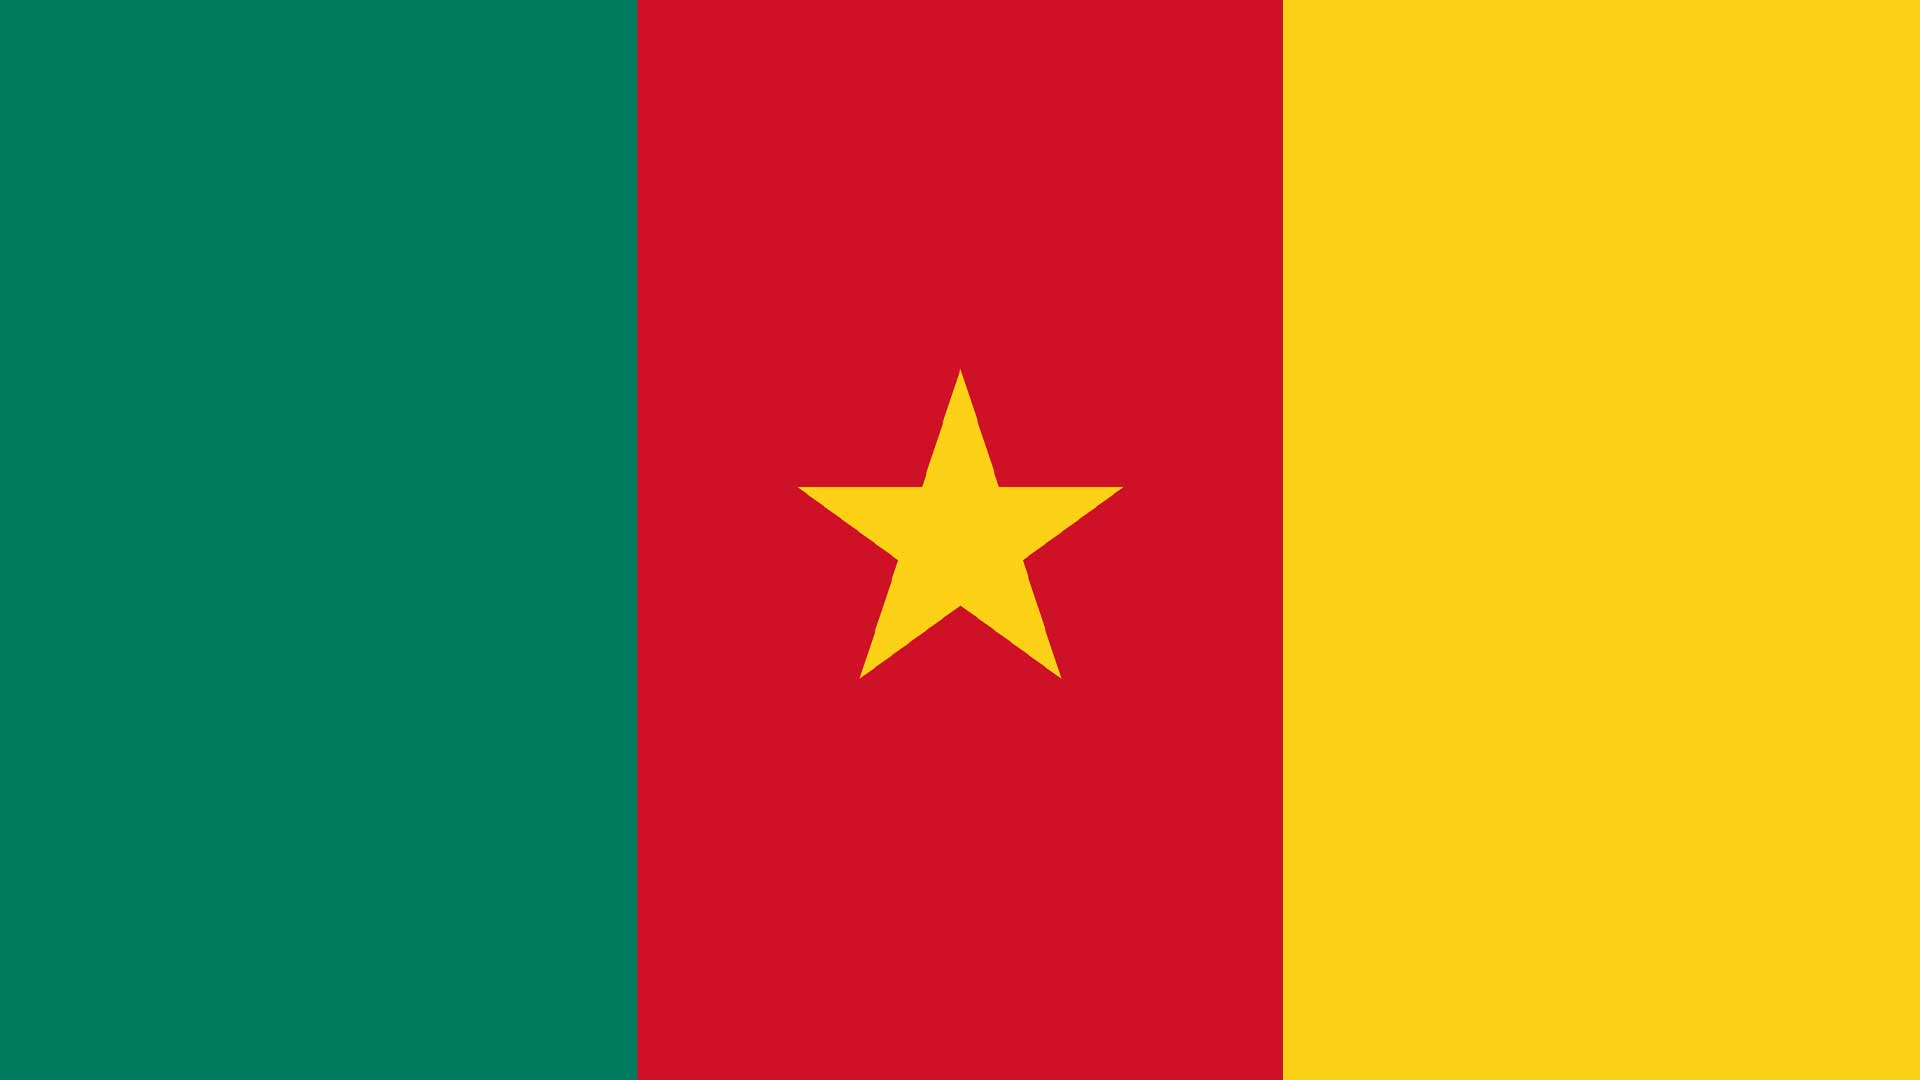 An African nation's flag with green, red and yellow